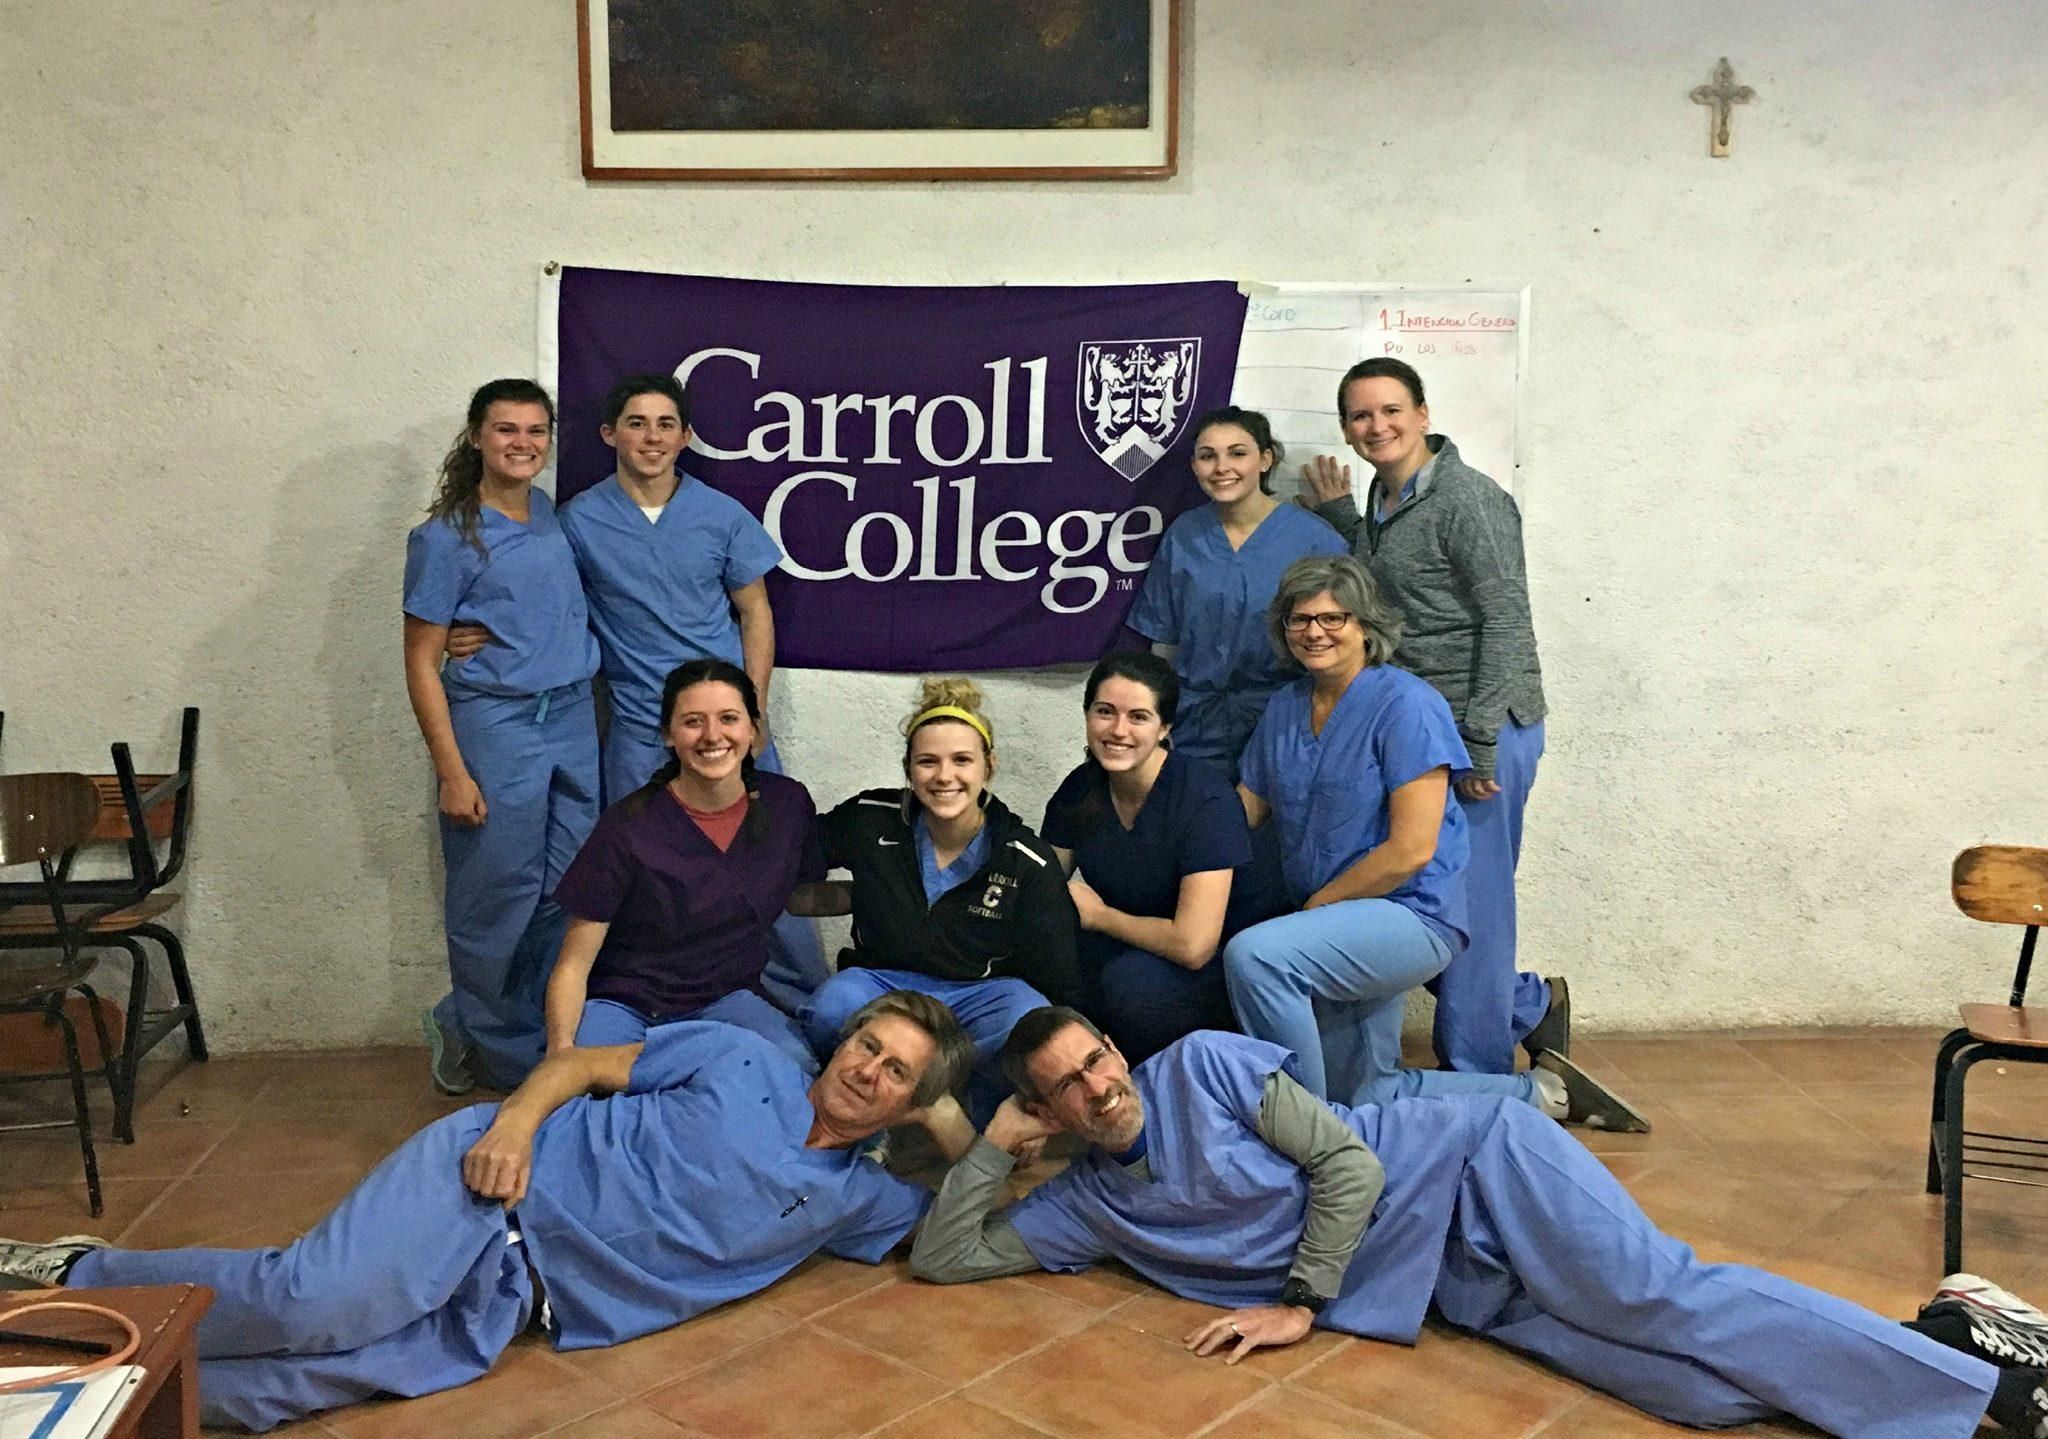 Carroll College Nursing Students pose next to a Carroll College Flag